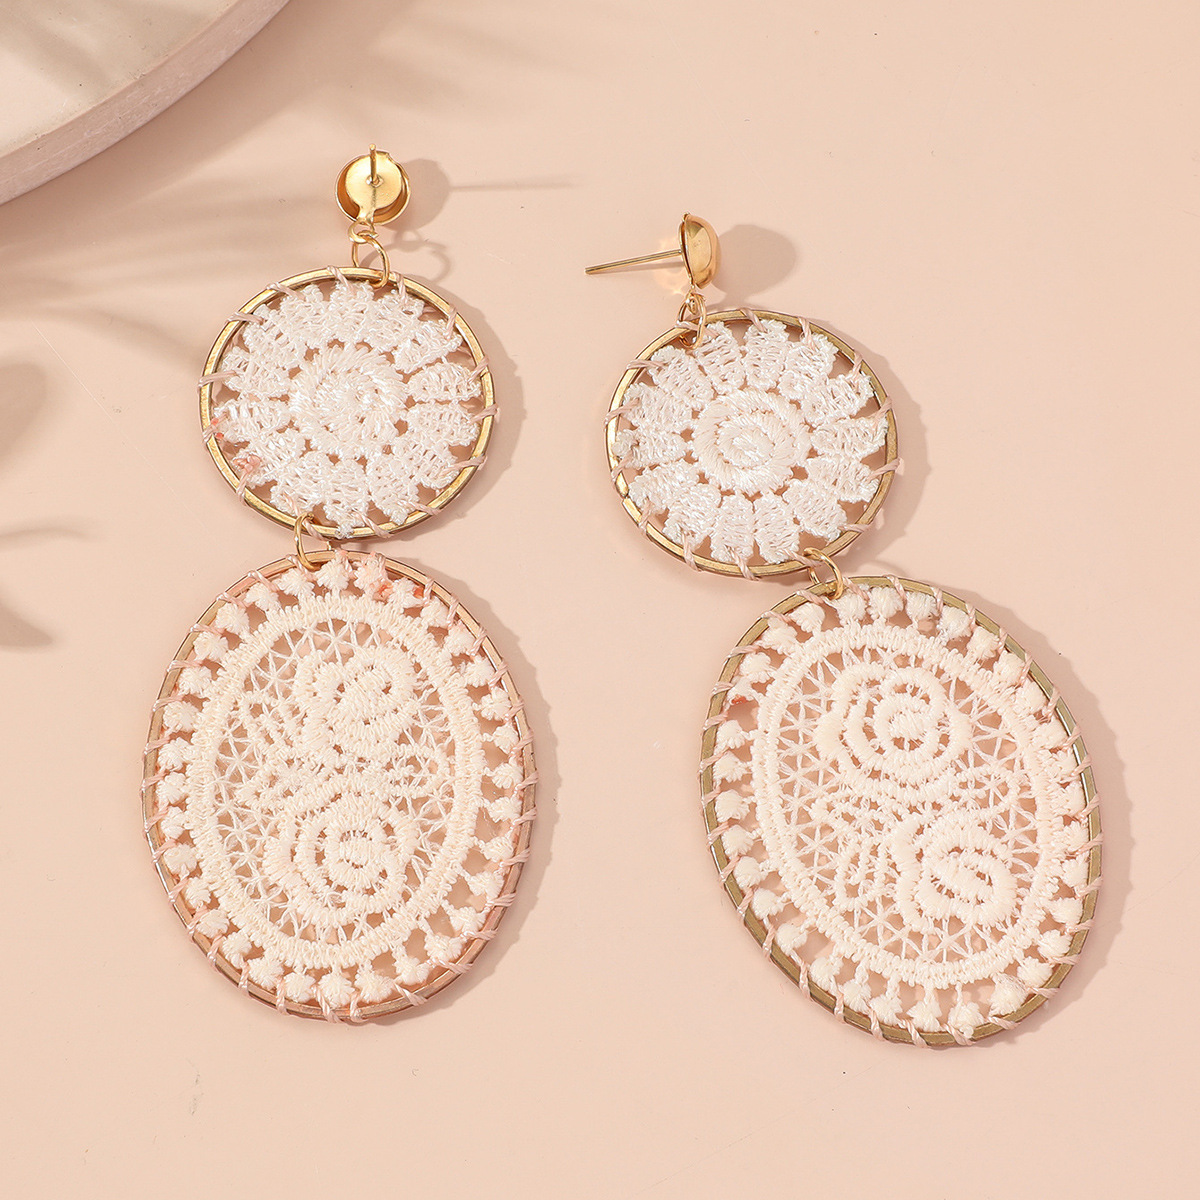 New Fashion Exaggerated Earrings Female Temperament High Sense Woven Hollowed Vintage Earrings